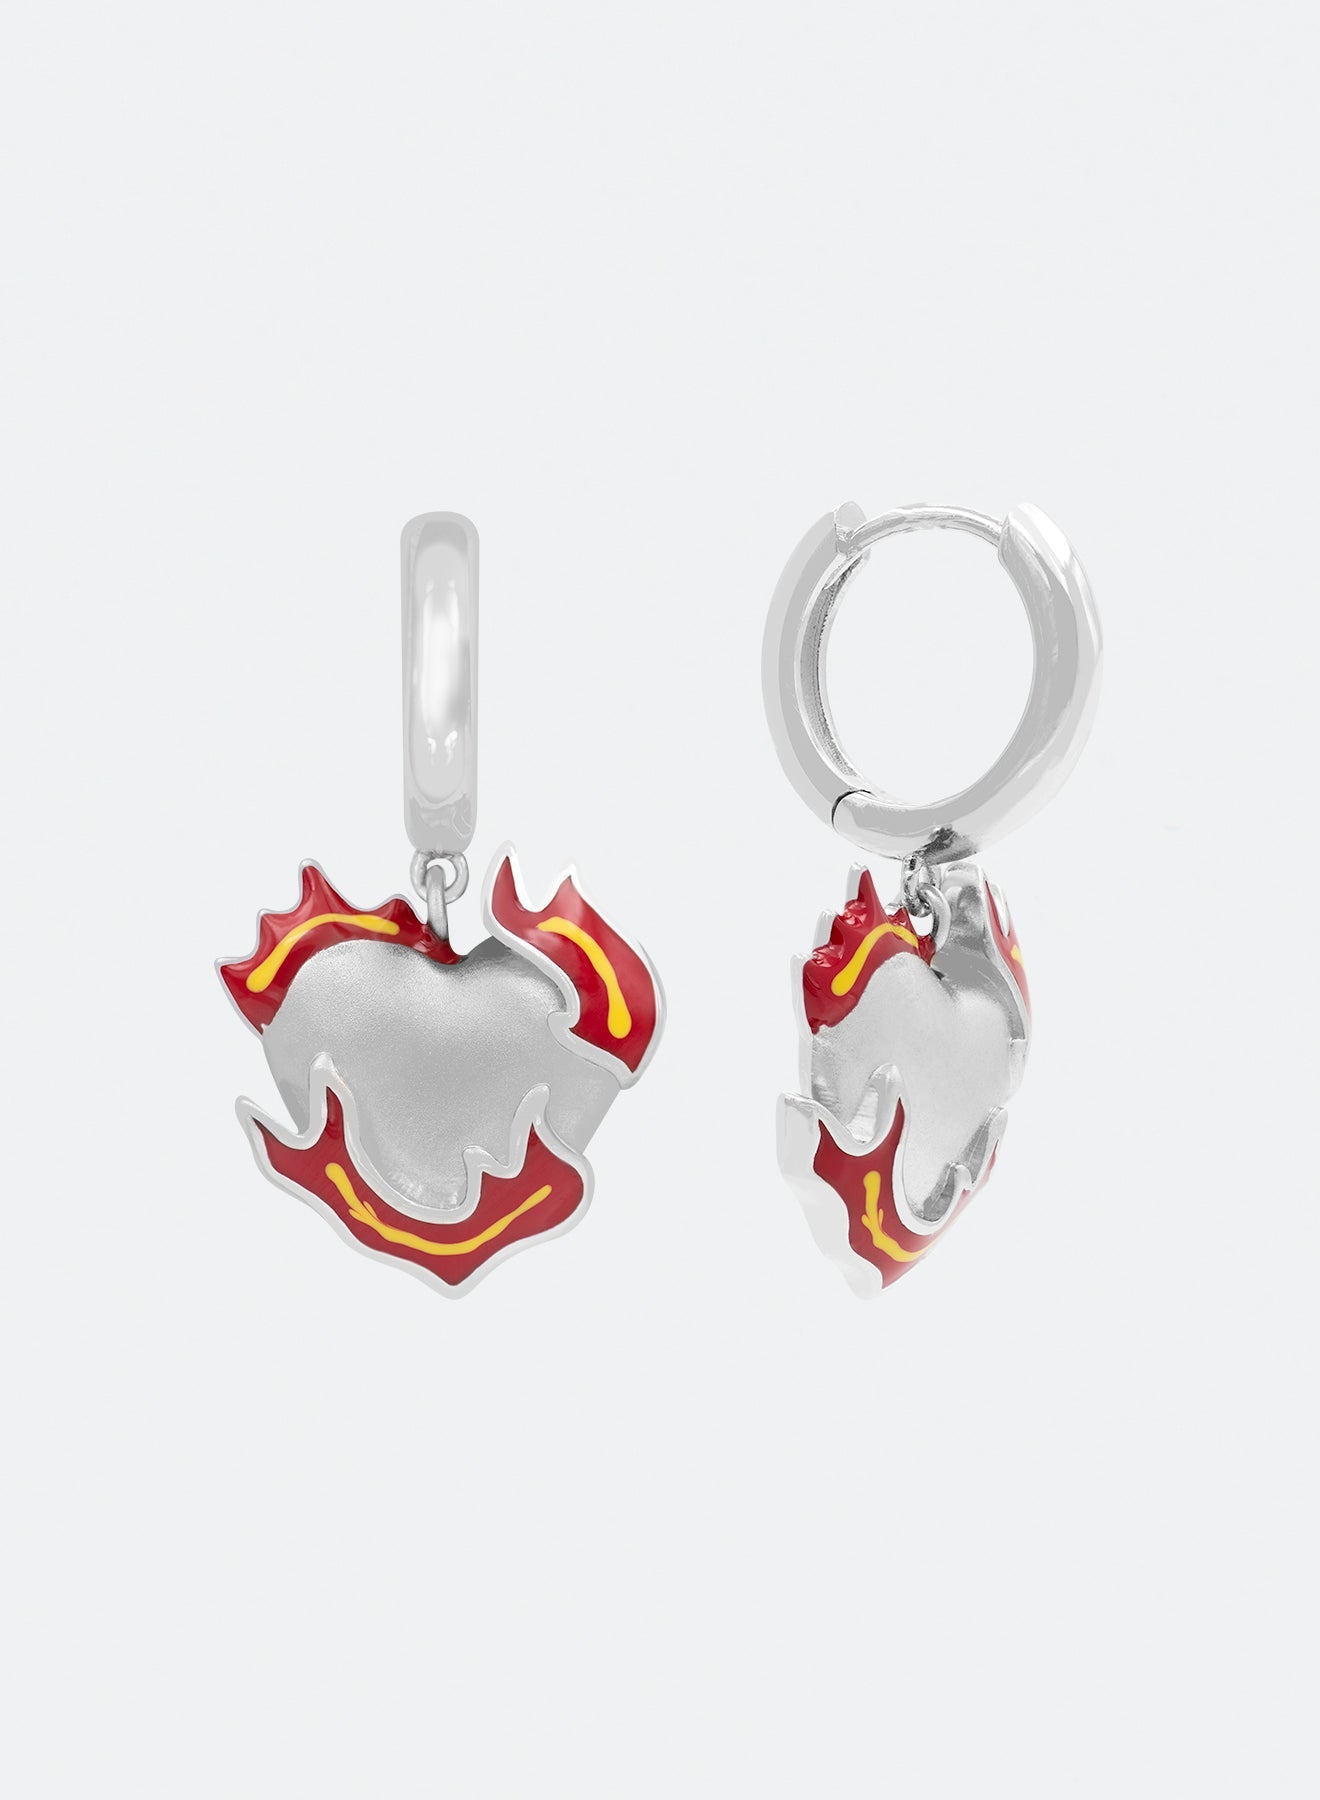 18k white gold coated heart earrings with red-yellow hand painted enamel and satined finishing